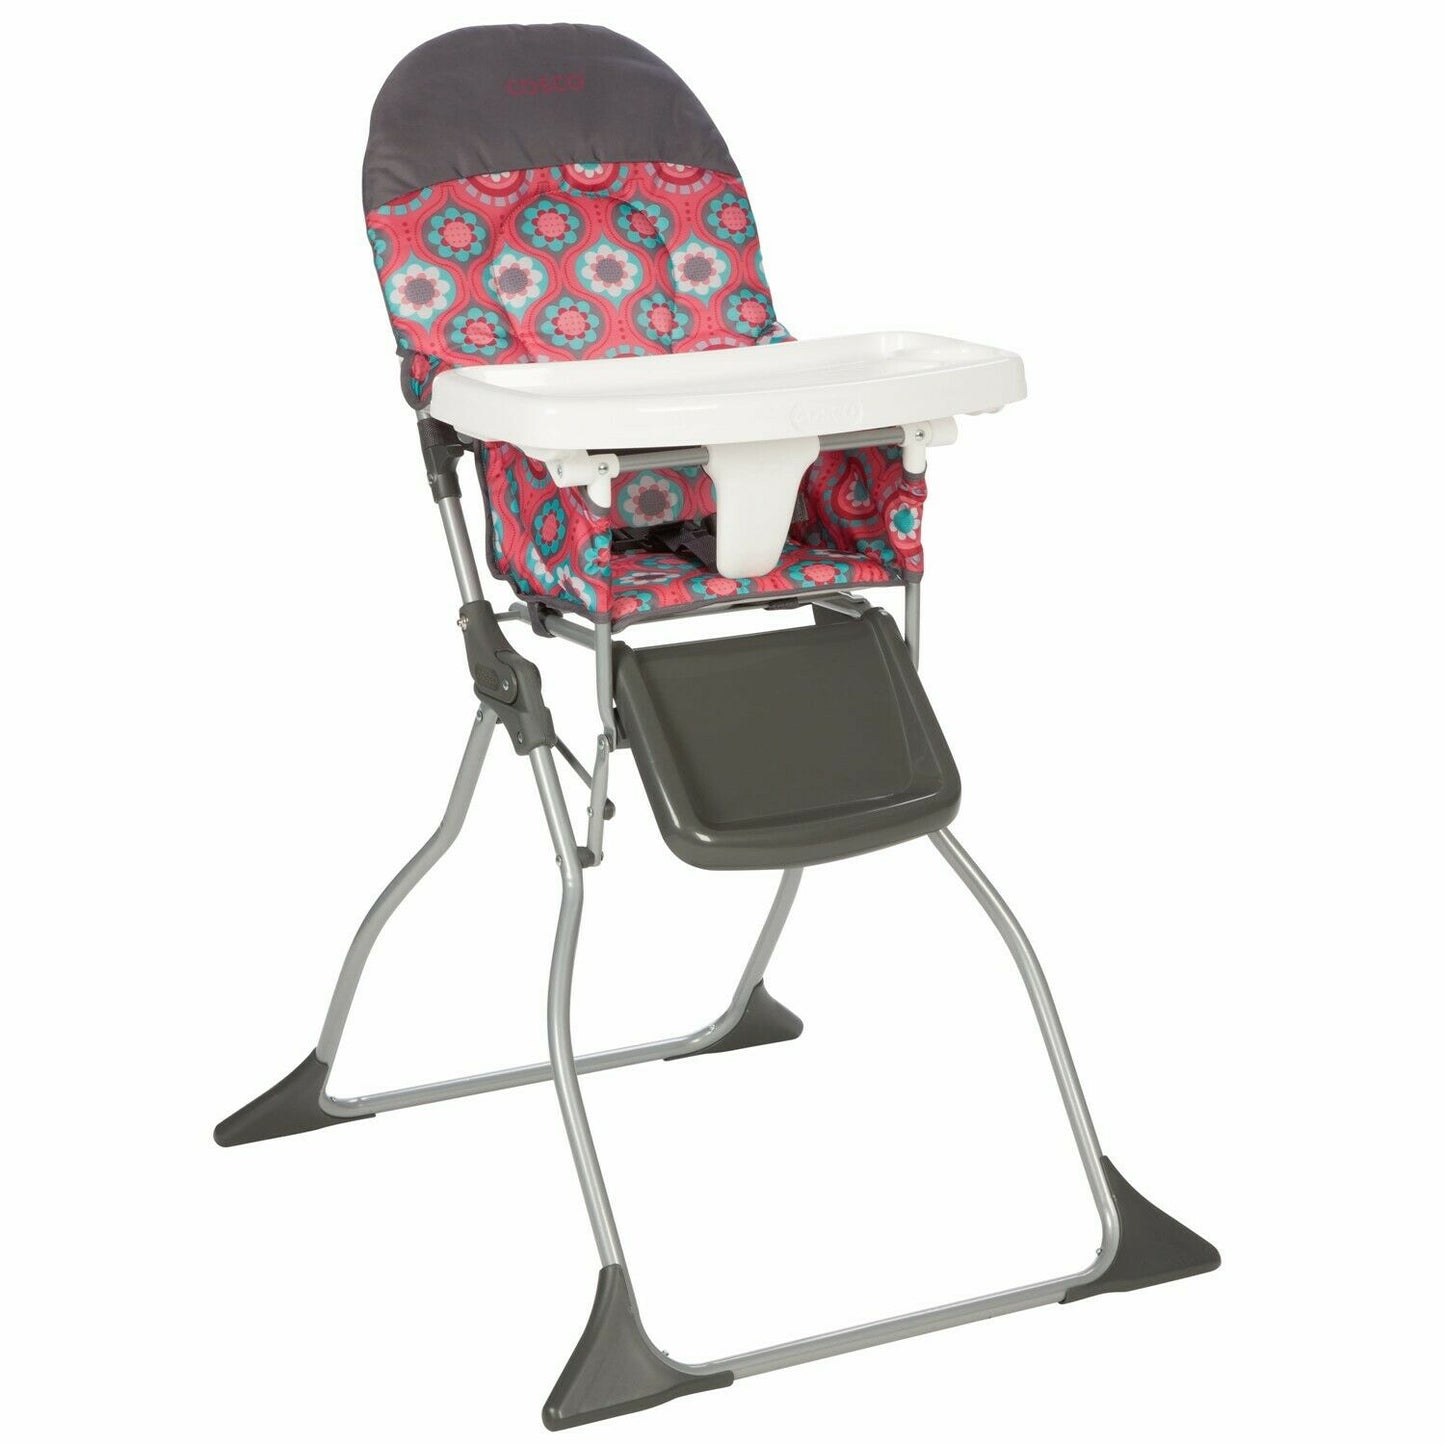 Baby Stroller with Car Seat Travel System Infant Playard High Chair Combo Floral